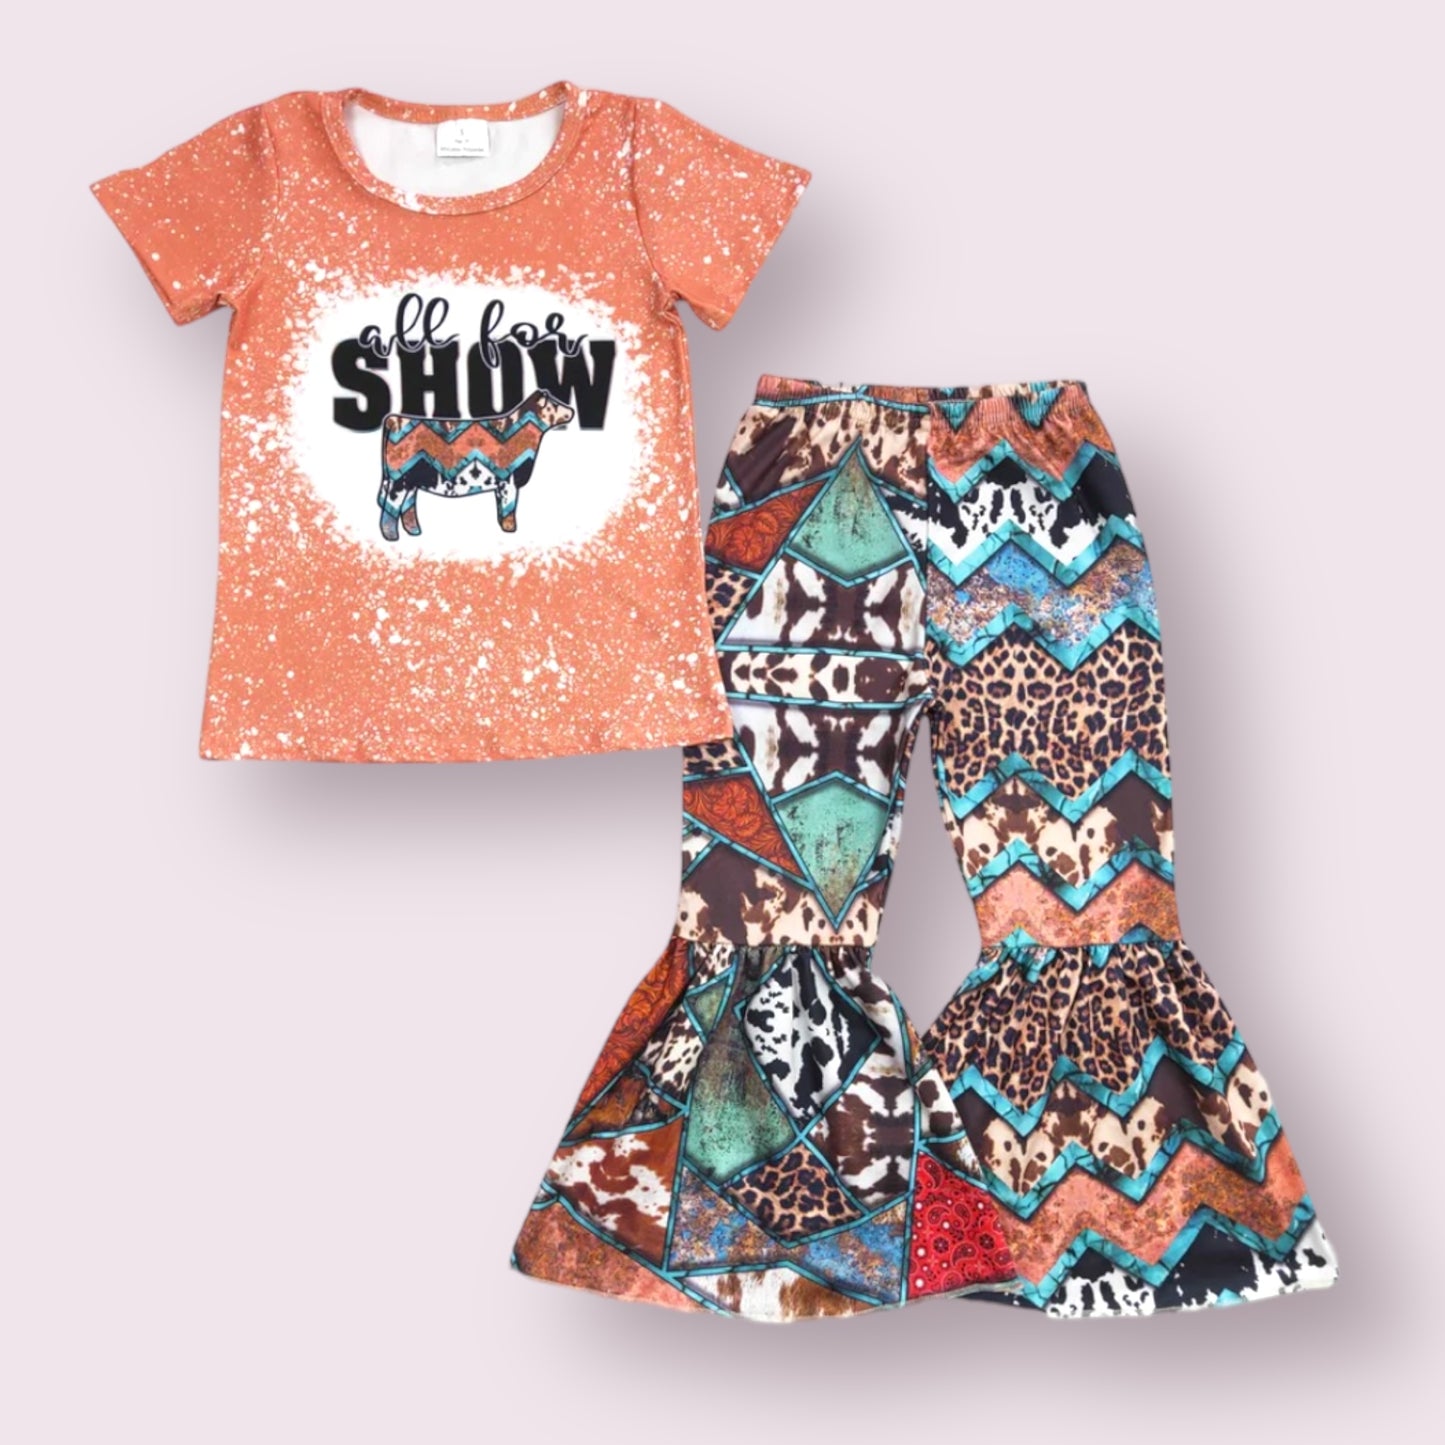 All For Show Top and Print Bell Pants